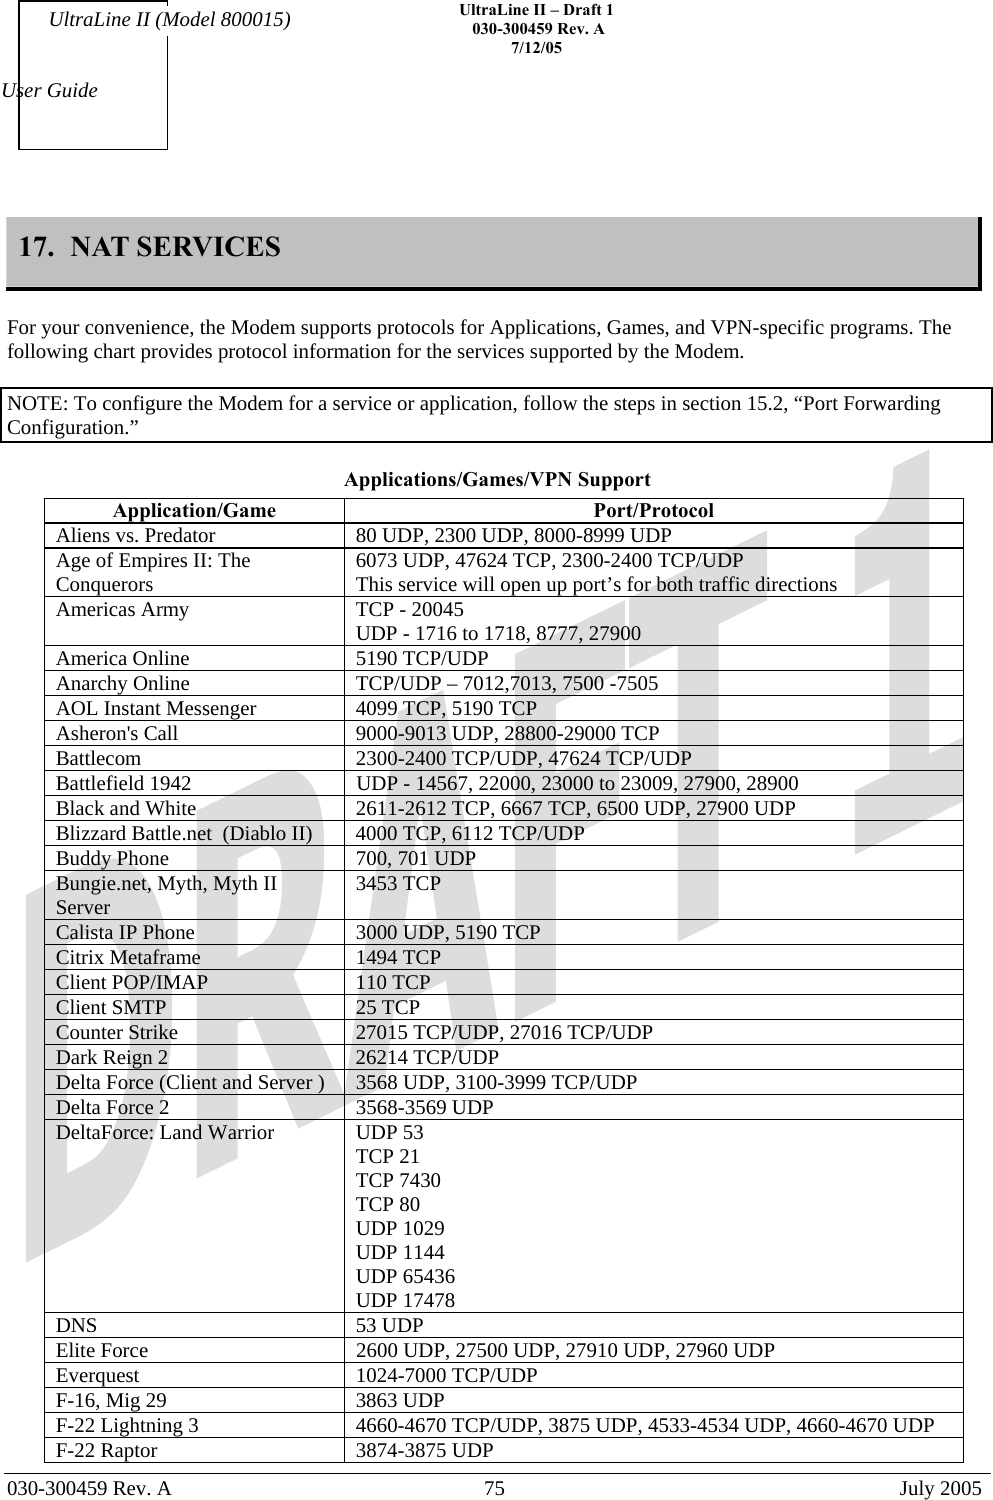    UltraLine II – Draft 1   030-300459 Rev. A 7/12/05   030-300459 Rev. A  75  July 2005  User Guide UltraLine II (Model 800015) 17.  NAT SERVICES   For your convenience, the Modem supports protocols for Applications, Games, and VPN-specific programs. The following chart provides protocol information for the services supported by the Modem.   NOTE: To configure the Modem for a service or application, follow the steps in section 15.2, “Port Forwarding Configuration.”  Applications/Games/VPN Support Application/Game  Port/Protocol Aliens vs. Predator  80 UDP, 2300 UDP, 8000-8999 UDP Age of Empires II: The Conquerors  6073 UDP, 47624 TCP, 2300-2400 TCP/UDP This service will open up port’s for both traffic directions Americas Army  TCP - 20045 UDP - 1716 to 1718, 8777, 27900 America Online  5190 TCP/UDP Anarchy Online  TCP/UDP – 7012,7013, 7500 -7505 AOL Instant Messenger  4099 TCP, 5190 TCP Asheron&apos;s Call  9000-9013 UDP, 28800-29000 TCP Battlecom  2300-2400 TCP/UDP, 47624 TCP/UDP Battlefield 1942  UDP - 14567, 22000, 23000 to 23009, 27900, 28900 Black and White  2611-2612 TCP, 6667 TCP, 6500 UDP, 27900 UDP Blizzard Battle.net  (Diablo II)  4000 TCP, 6112 TCP/UDP Buddy Phone  700, 701 UDP Bungie.net, Myth, Myth II Server  3453 TCP Calista IP Phone  3000 UDP, 5190 TCP Citrix Metaframe  1494 TCP Client POP/IMAP  110 TCP Client SMTP  25 TCP Counter Strike  27015 TCP/UDP, 27016 TCP/UDP Dark Reign 2  26214 TCP/UDP Delta Force (Client and Server )  3568 UDP, 3100-3999 TCP/UDP Delta Force 2  3568-3569 UDP DeltaForce: Land Warrior  UDP 53 TCP 21 TCP 7430 TCP 80 UDP 1029 UDP 1144 UDP 65436 UDP 17478 DNS 53 UDP Elite Force  2600 UDP, 27500 UDP, 27910 UDP, 27960 UDP Everquest 1024-7000 TCP/UDP F-16, Mig 29  3863 UDP F-22 Lightning 3  4660-4670 TCP/UDP, 3875 UDP, 4533-4534 UDP, 4660-4670 UDP F-22 Raptor  3874-3875 UDP 